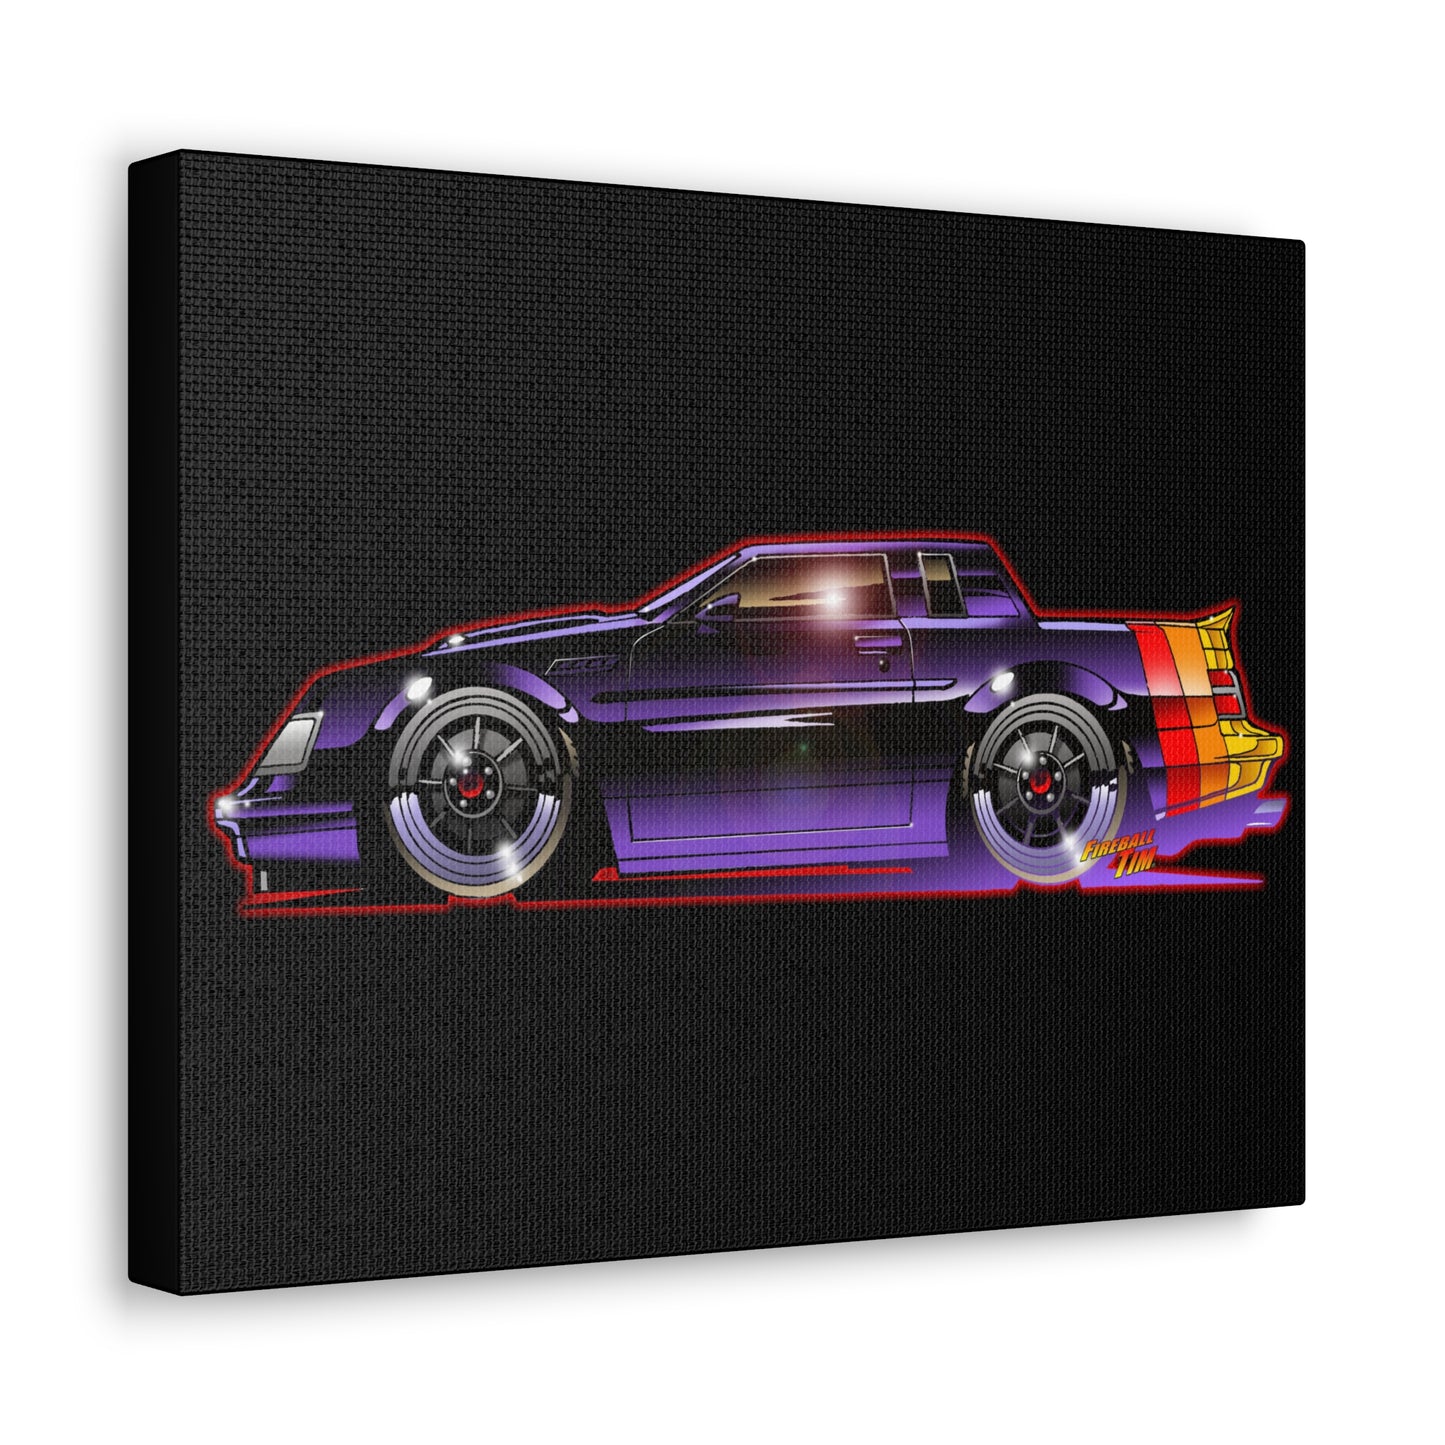 BUICK GRAND NATIONAL GNX 1987 Canvas Gallery Art Print 11x14